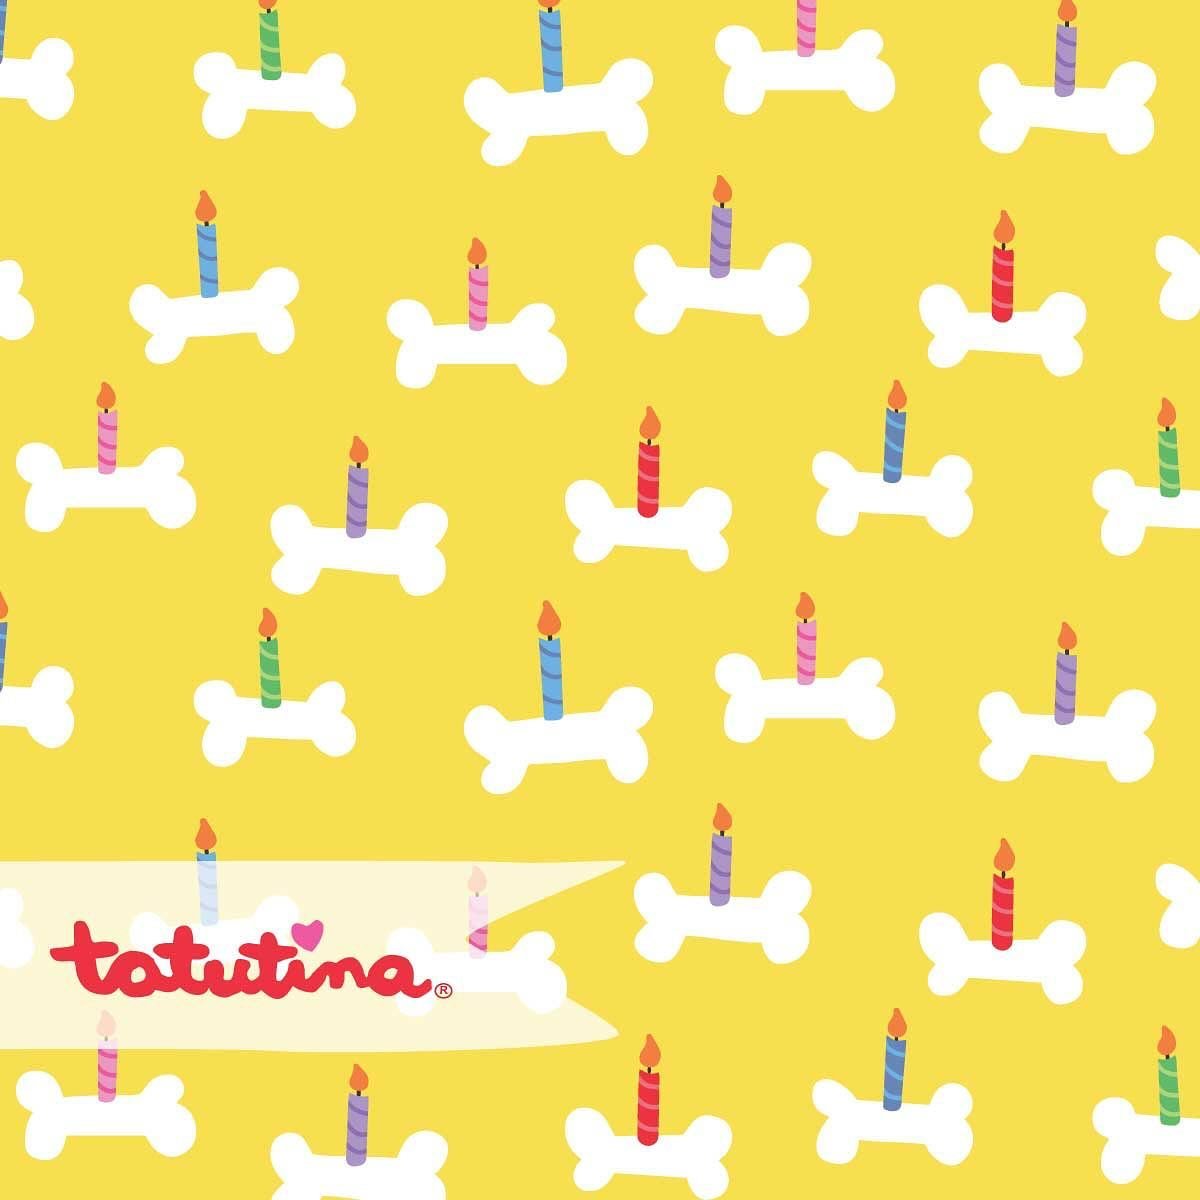 Happy Birthday Doggos 🐾🦴🎂
New bone cake fabric for dog accessory makers! Birthday dog bandana makers- go check it out🐾
Now available for purchase on Tatutina&rsquo;s @spoonflower fabric shop. (link in bio)